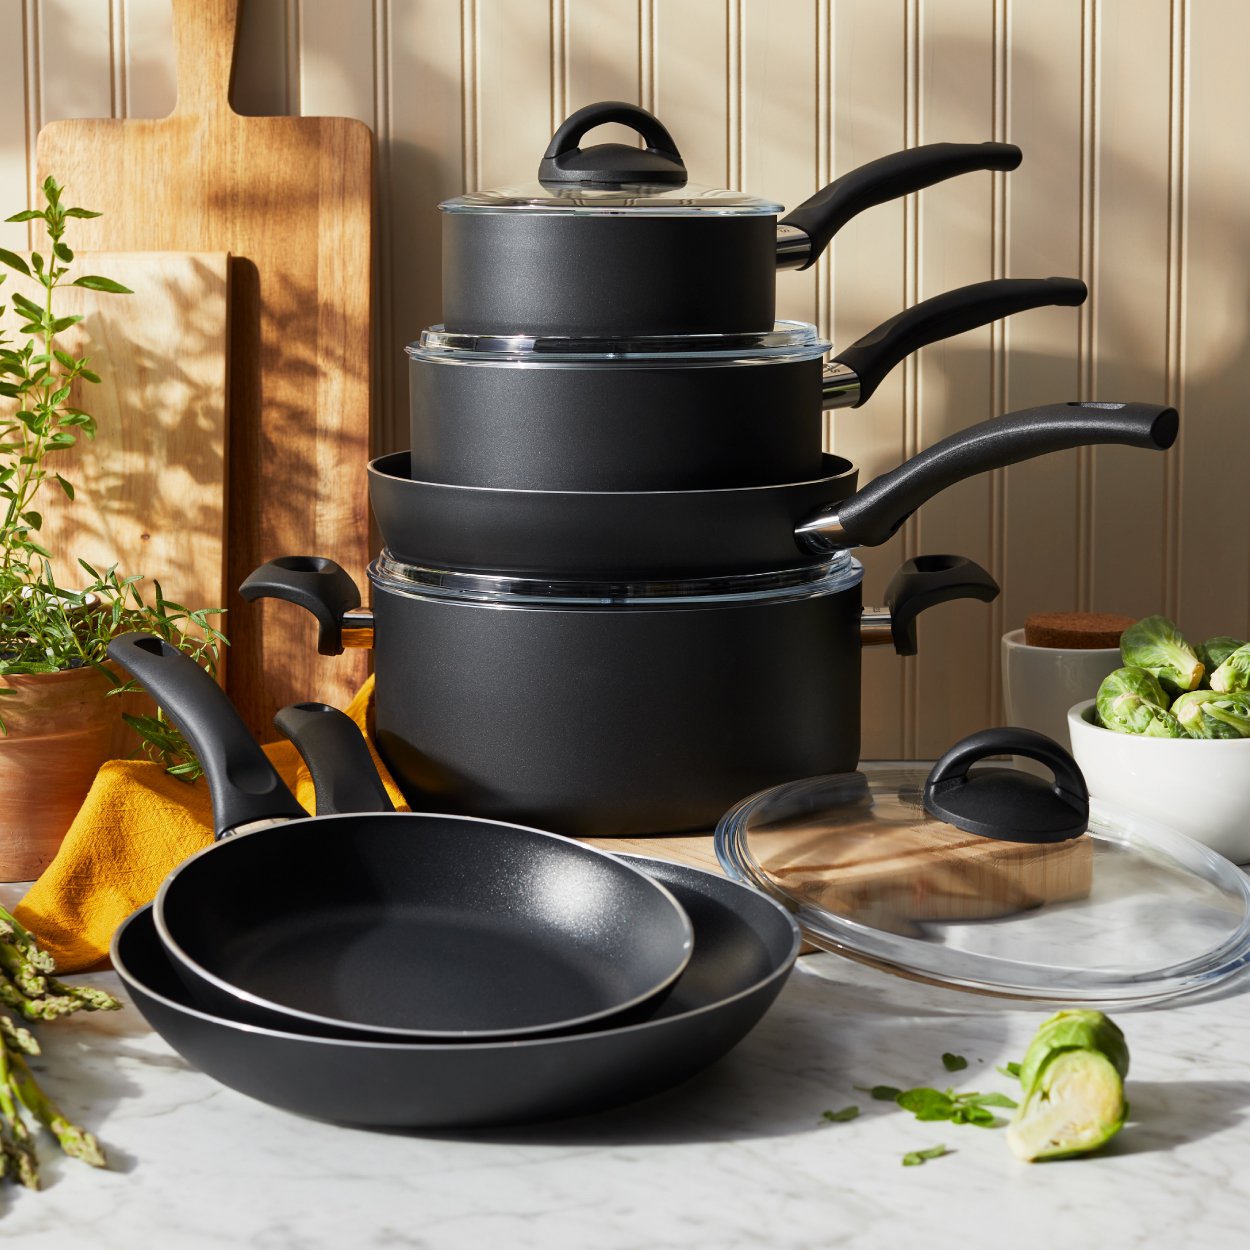 https://www.zwilling.com/on/demandware.static/-/Sites-zwilling-us-Library/default/dw2bc7c629/images/product-content/masonry-content/henckels/cookware/Everlift/MasonryTemplate_600-600_5.jpg